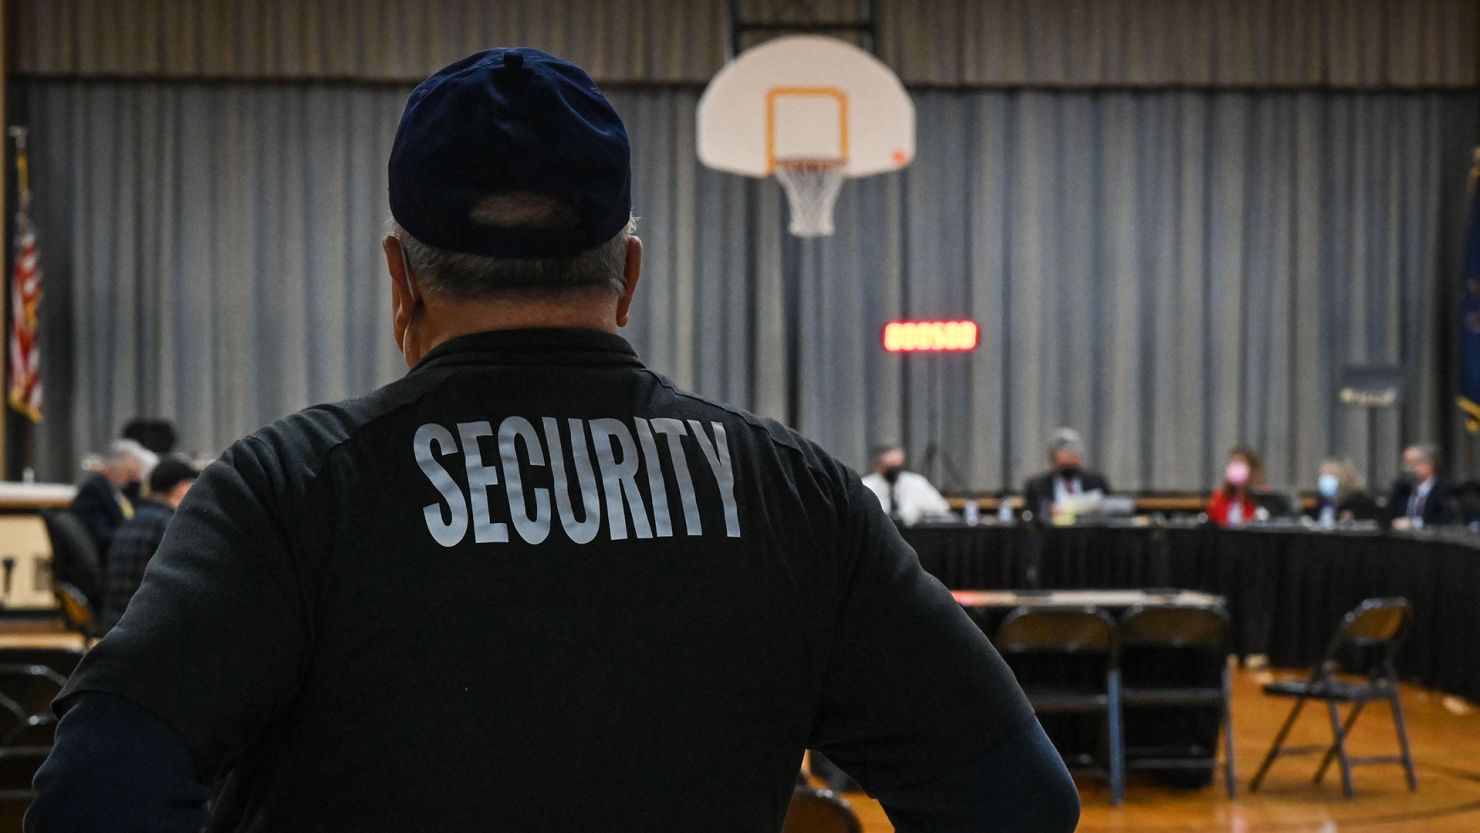 A Pennsbury School District security guard observes a Pennsbury School Board meeting in Levittown, Pennsylvania on December 16, 2021.